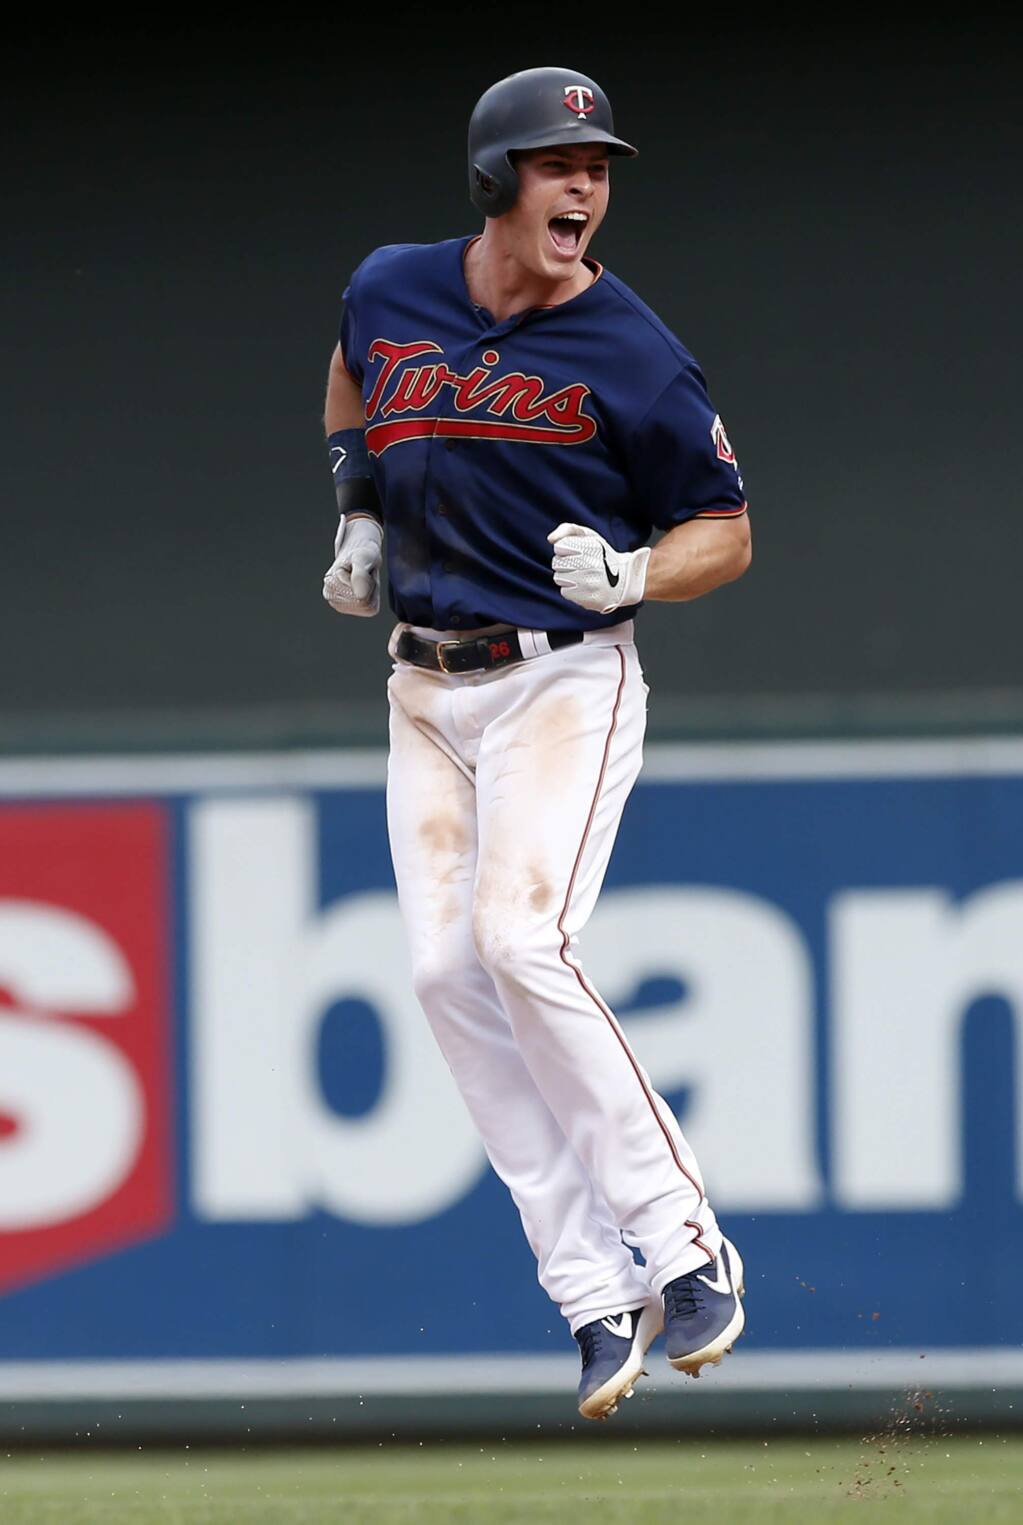 Minnesota Twins predictions: Max Kepler, trades and more 